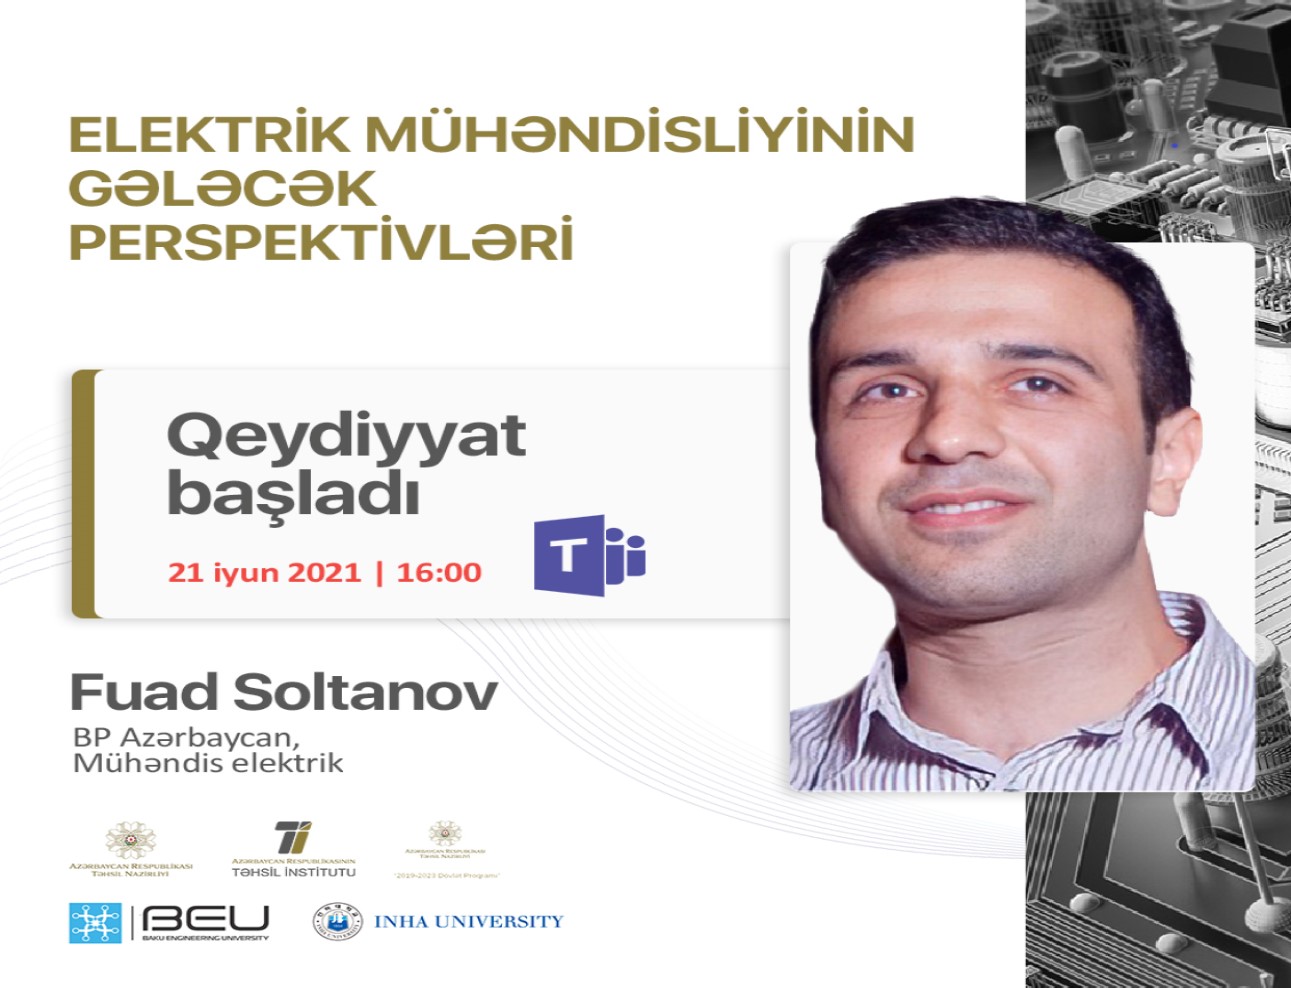 A webinar on "Future Perspectives of Electrical Engineering" to be held